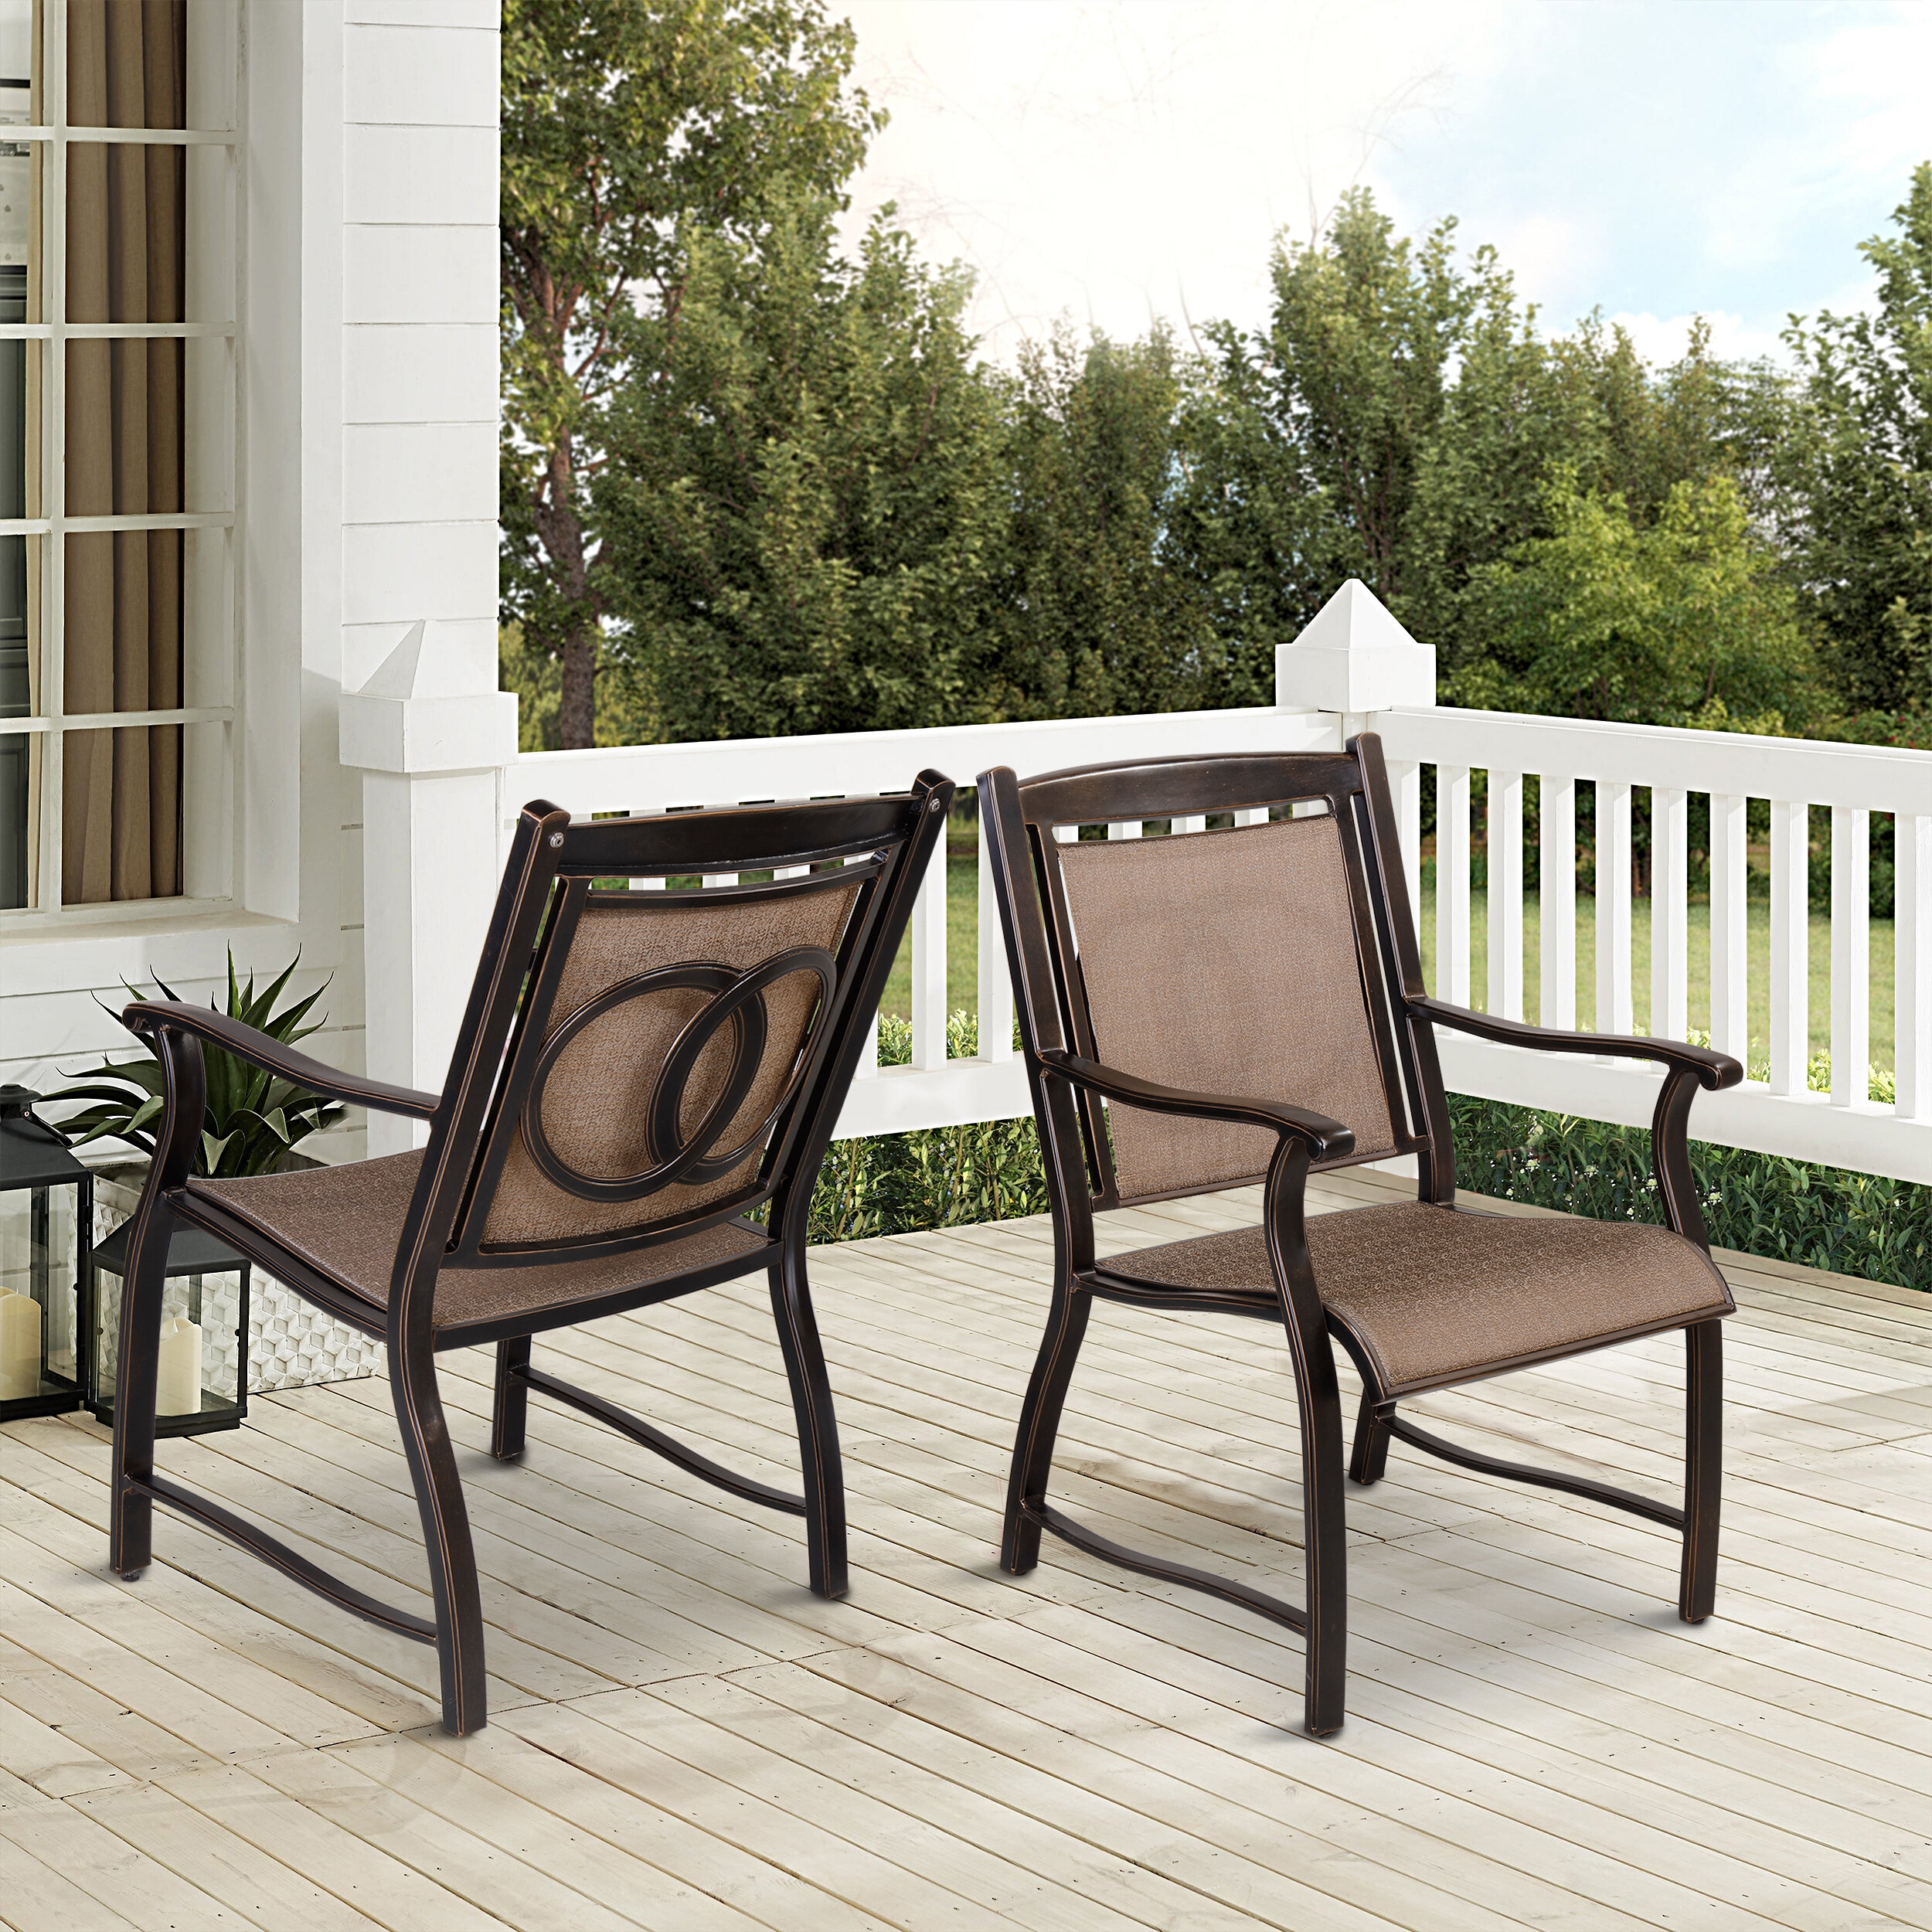 4 pieces outdoor furniture cw aluminum dining chair